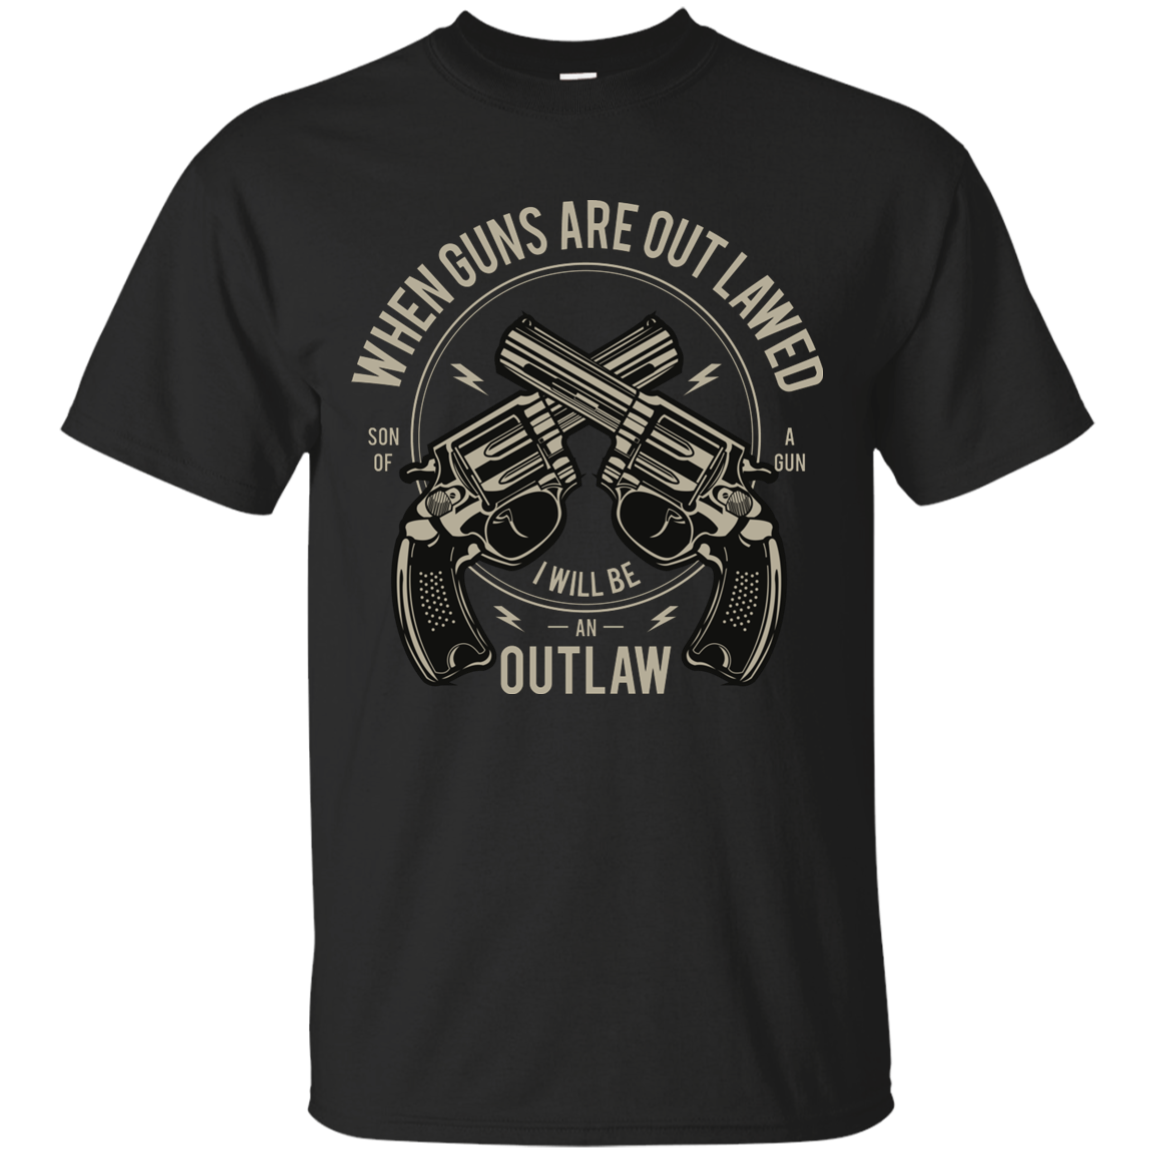 WHEN GUNS ARE OUTLAWED TEE